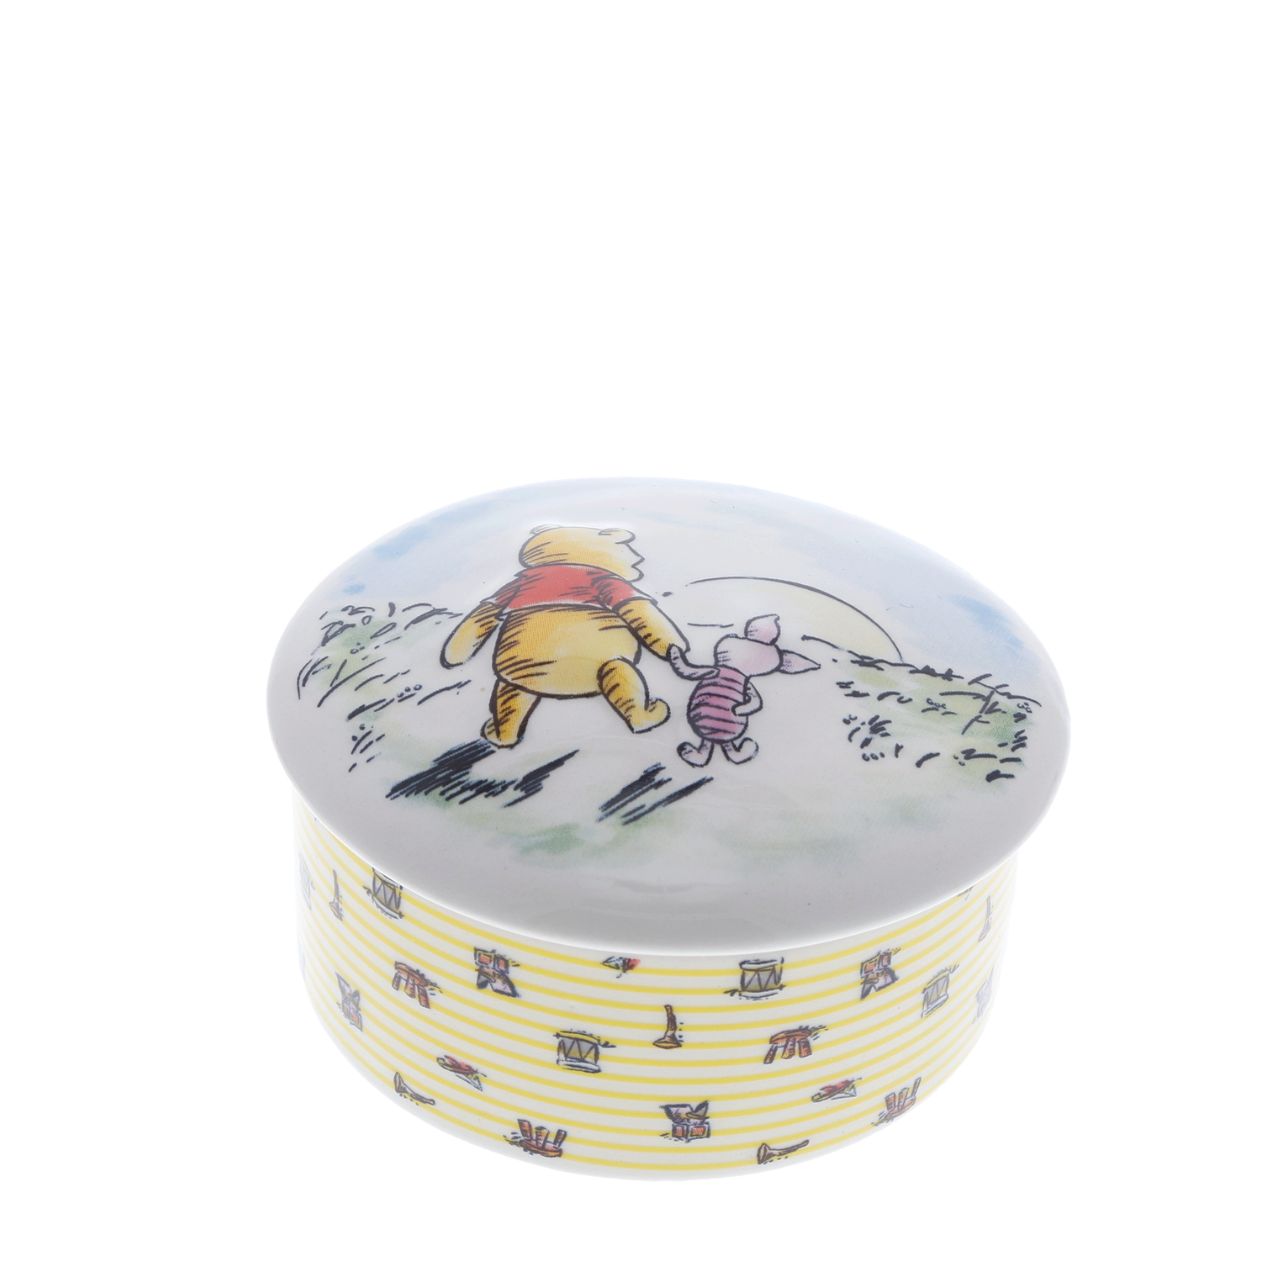 Disney Winnie The Pooh Keepsake Box  Designed with new parents in mind, this is a lovely way to keep memories of those early baby days safe. This cute Winnie the Pooh ceramic, keepsake box is perfect for those special tokens that can be stored carefully away and looked over fondly as your child grows.